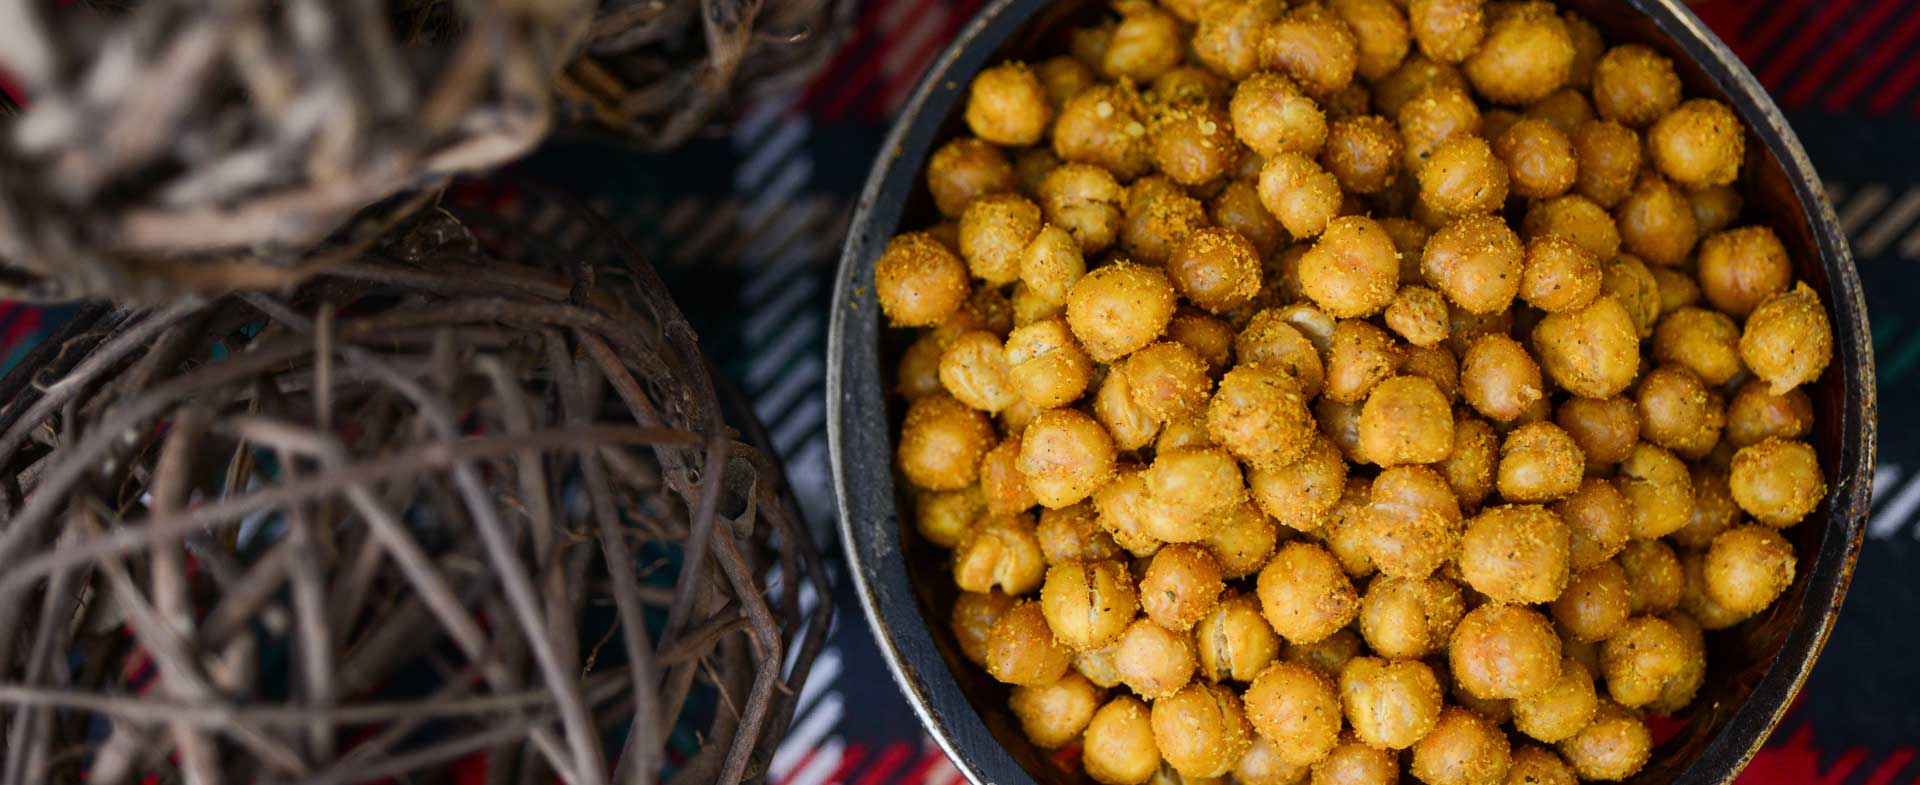 spicy garlic and turmeric roasted chickpeas